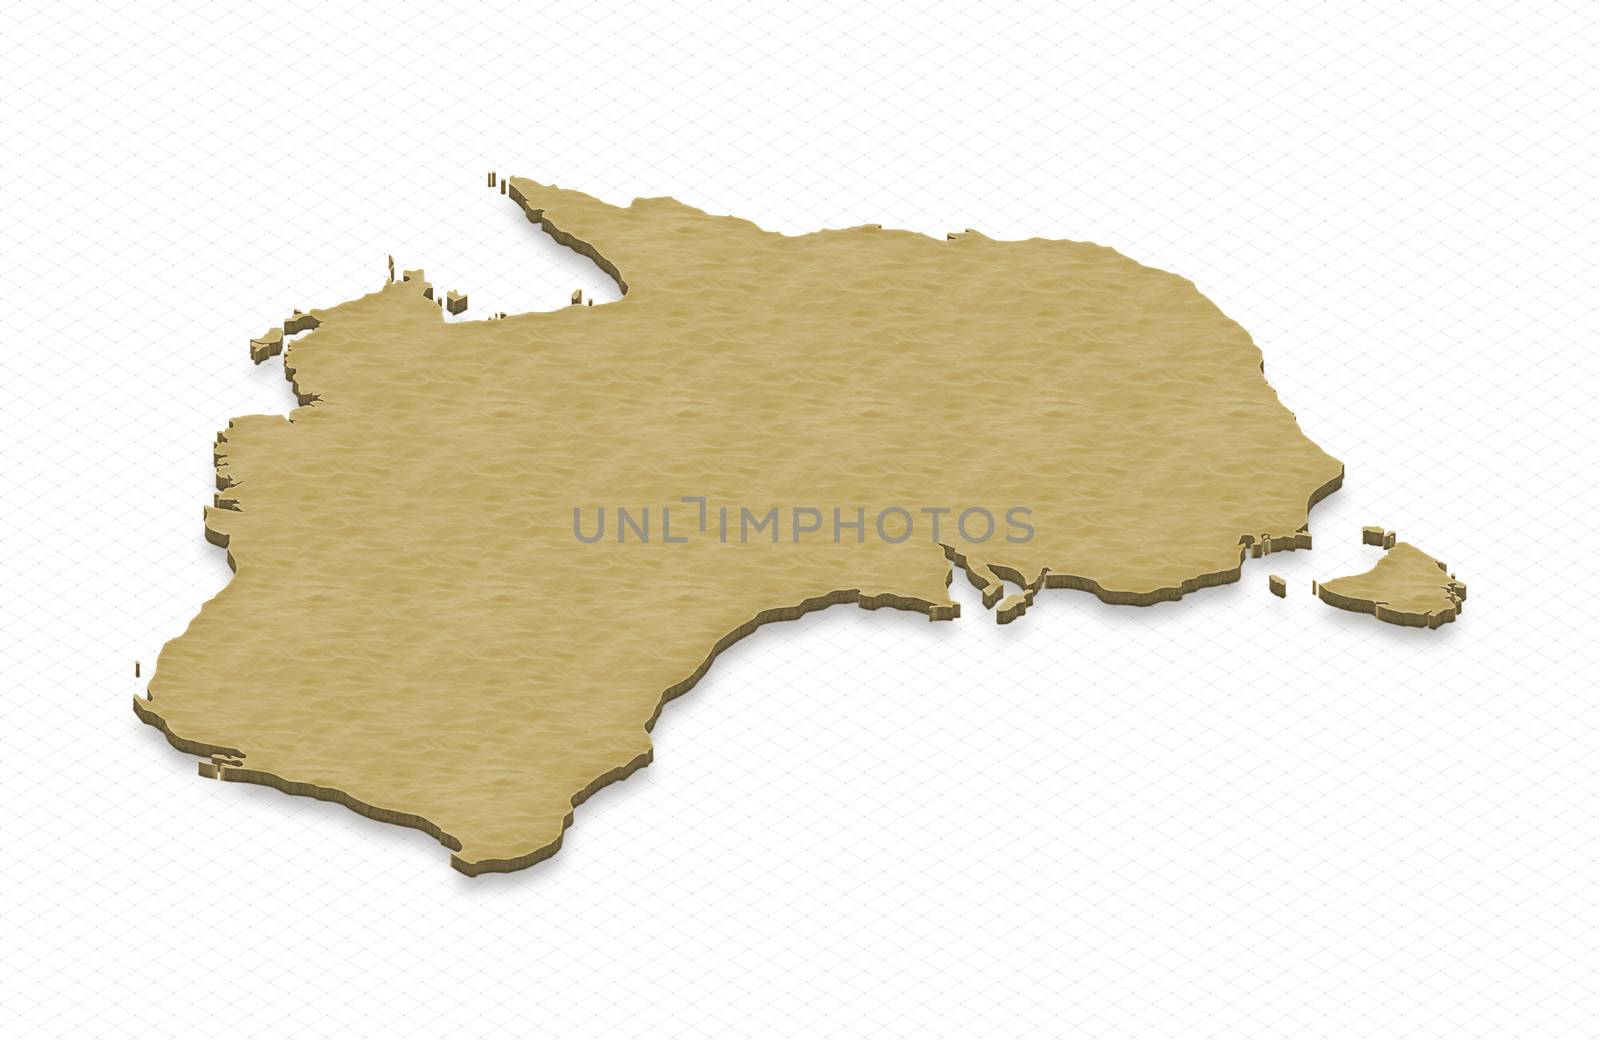 Illustration of a sand ground map of Australia on grid background. Right 3D isometric projection.